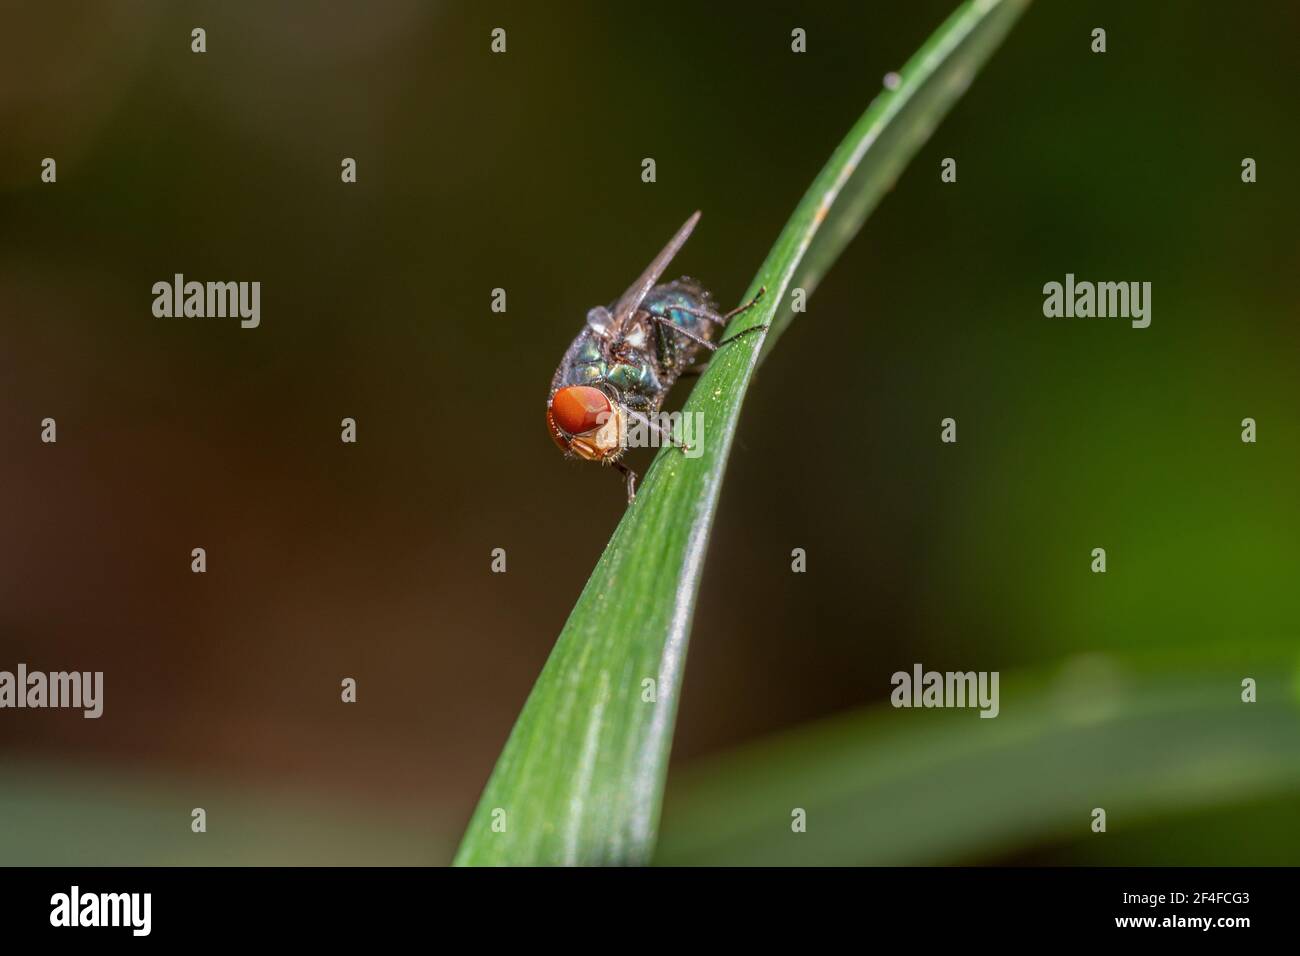 Housefly with big red eyes relaxing on a green leaf Stock Photo